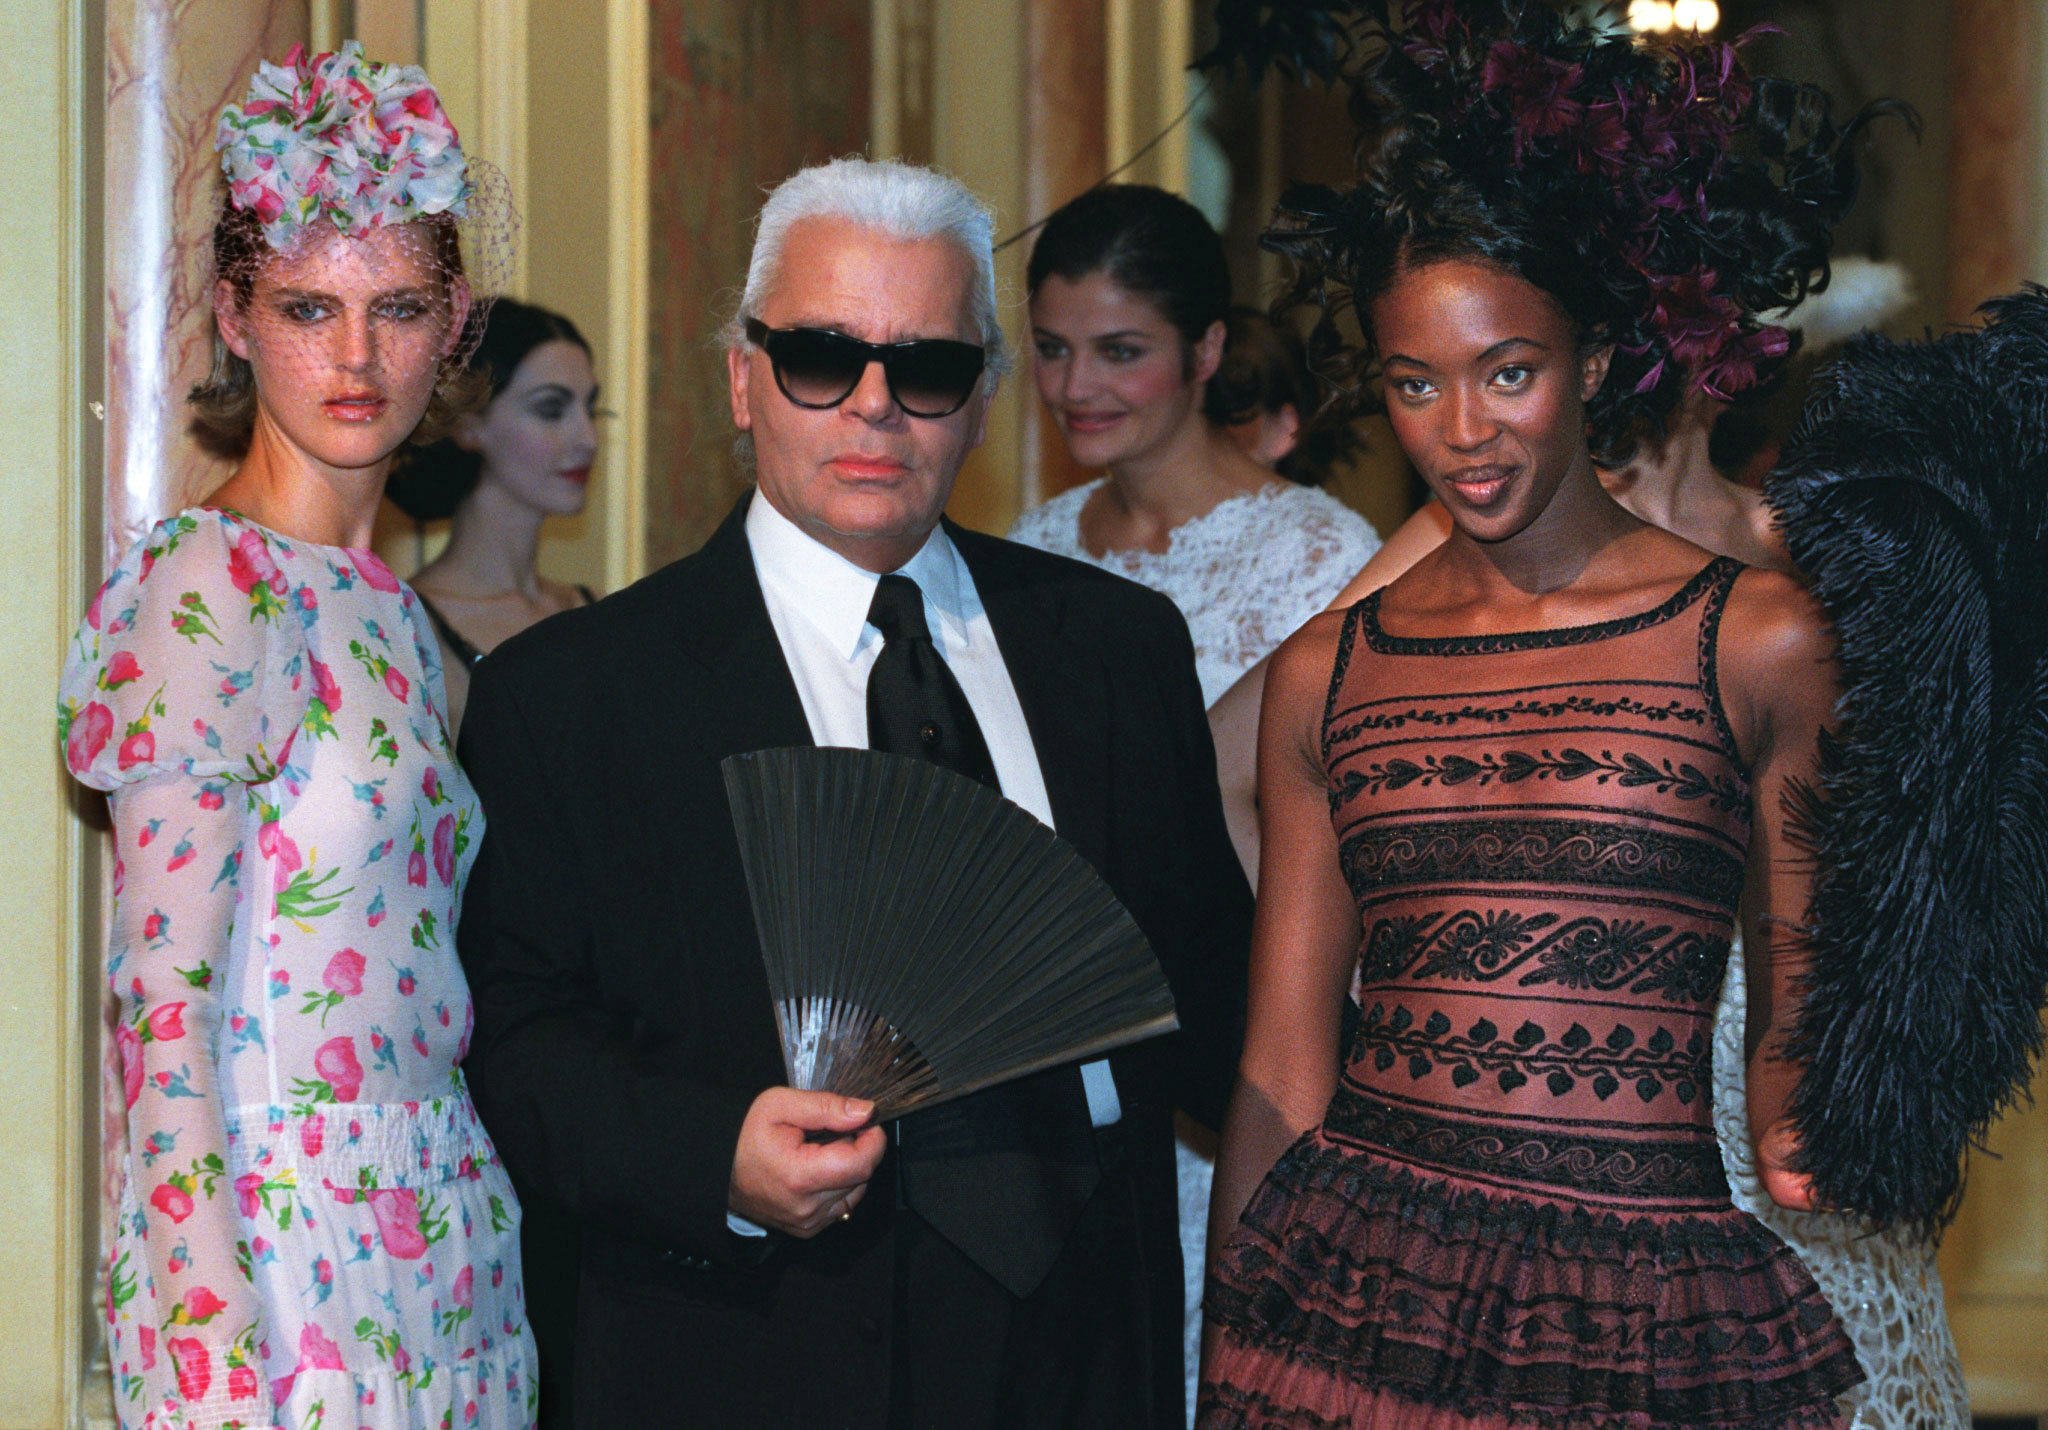 Channeling Chanel: the theme of the 2023 Met Gala is “In honour of Karl [Lagerfeld]“. The German designer died in early 2019. Photo: Reuters